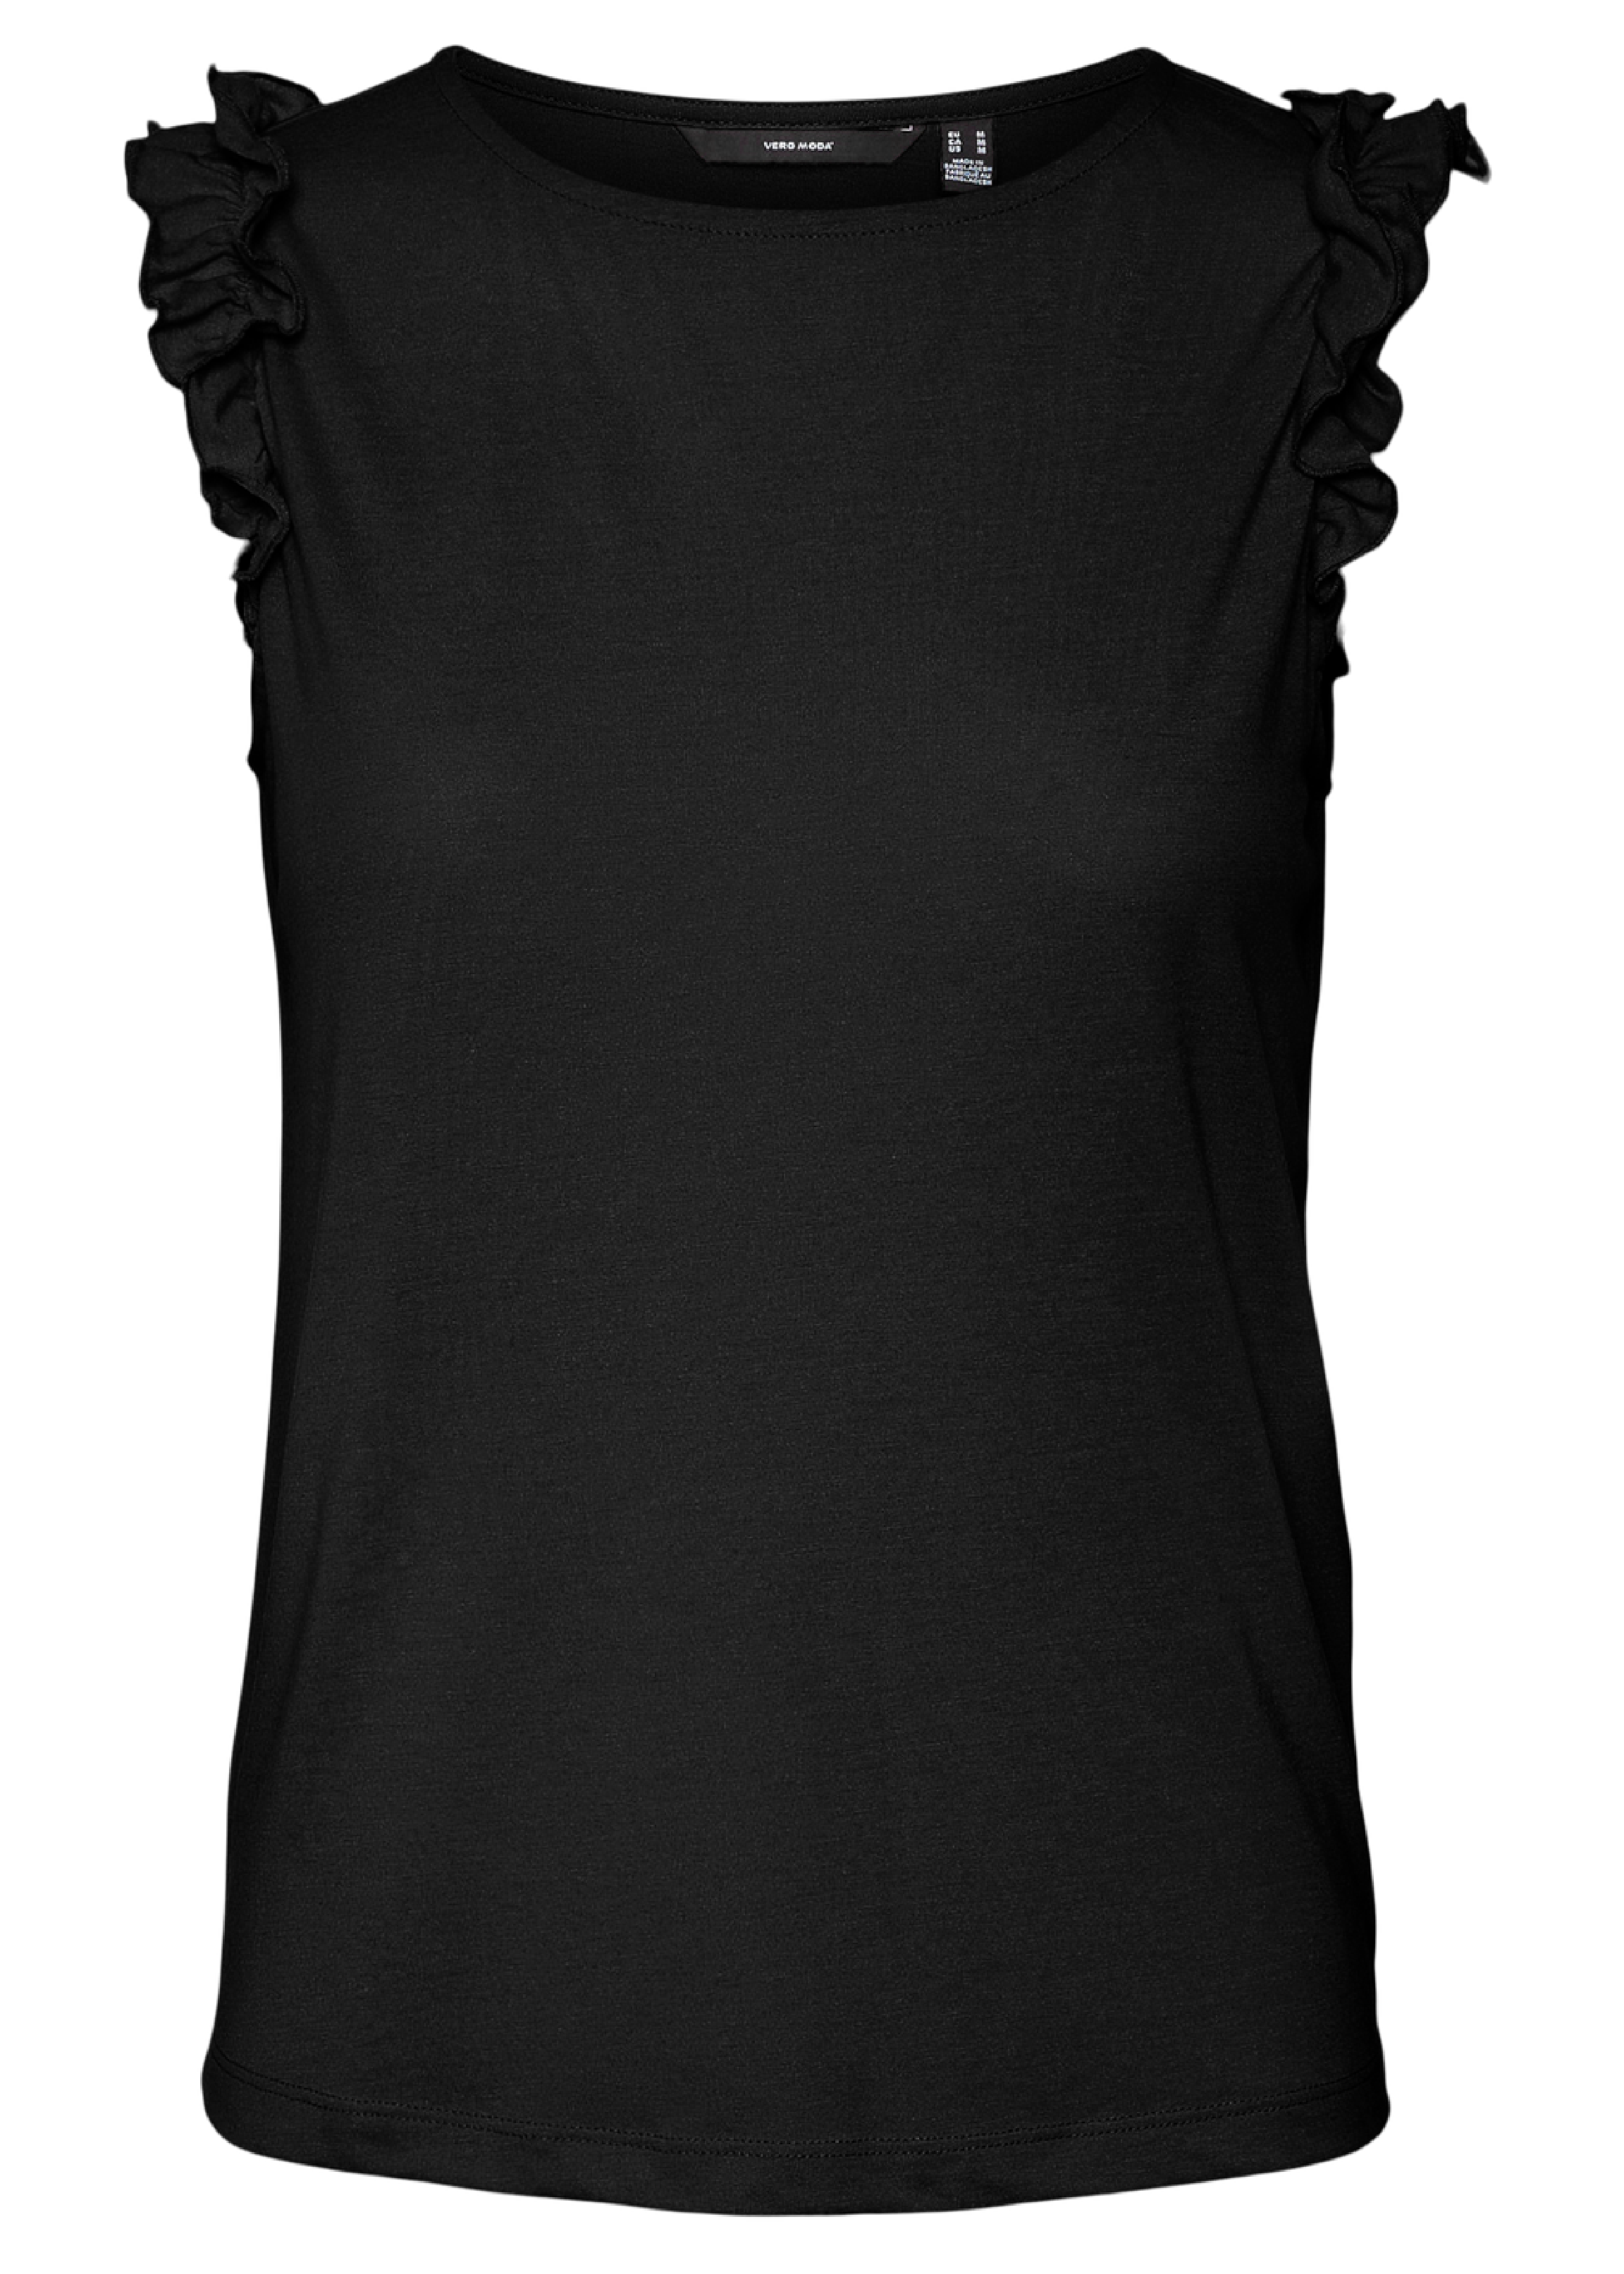 Spicy Black Frill Top